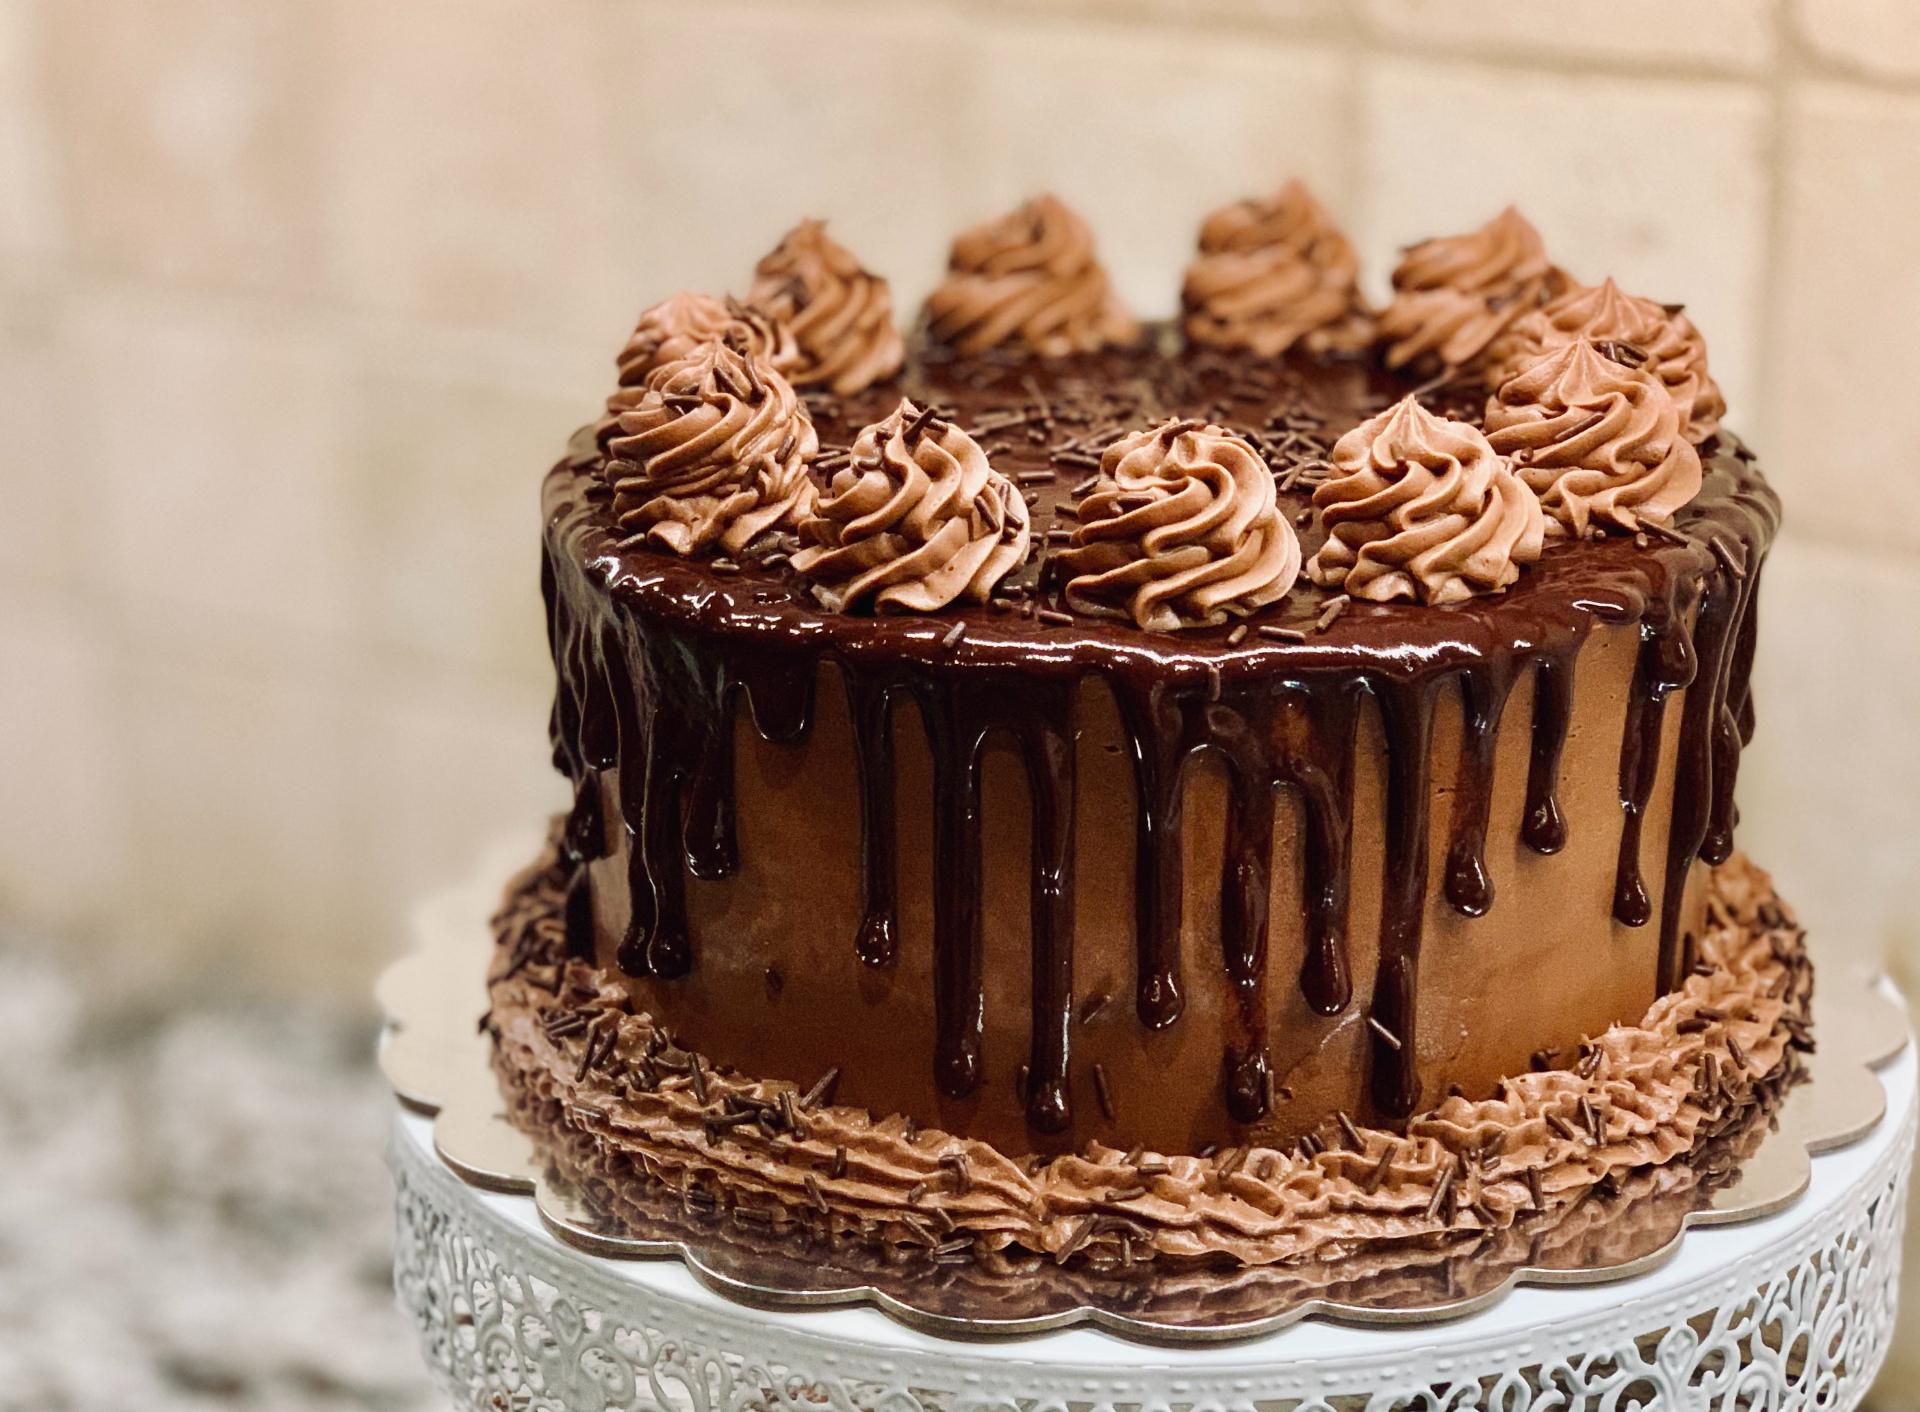 Delicious chocolate cake. Cakes are the kings of desserts because they're the most famous. If you dont sell this dessert on your coffee shop you're losing money